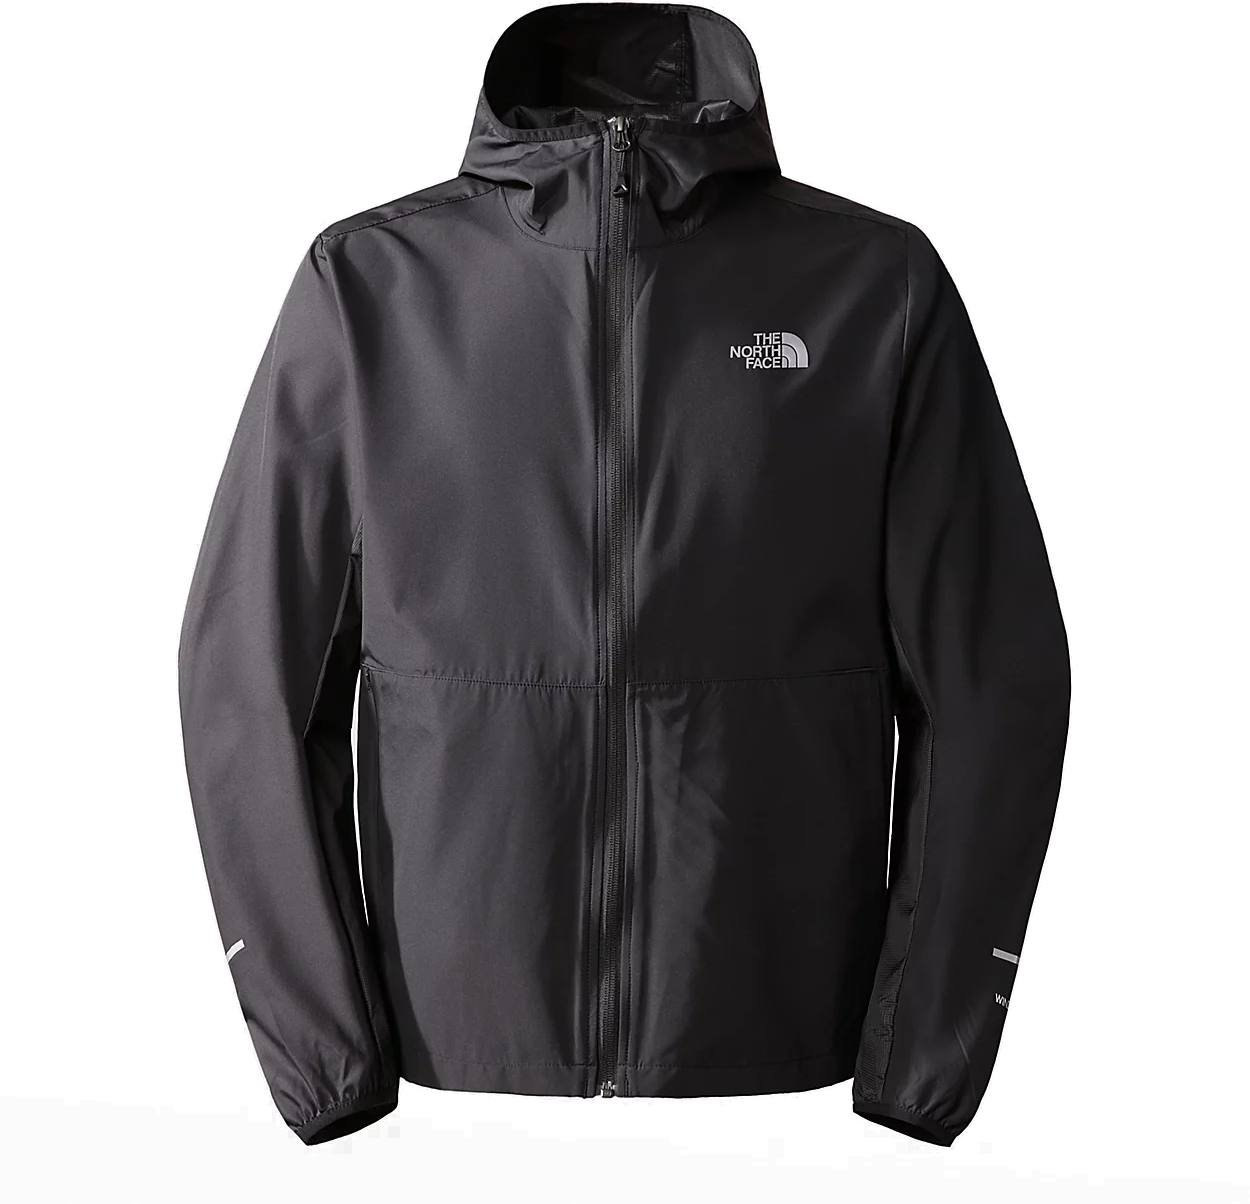 The North Face Running Wind Jacket Black L